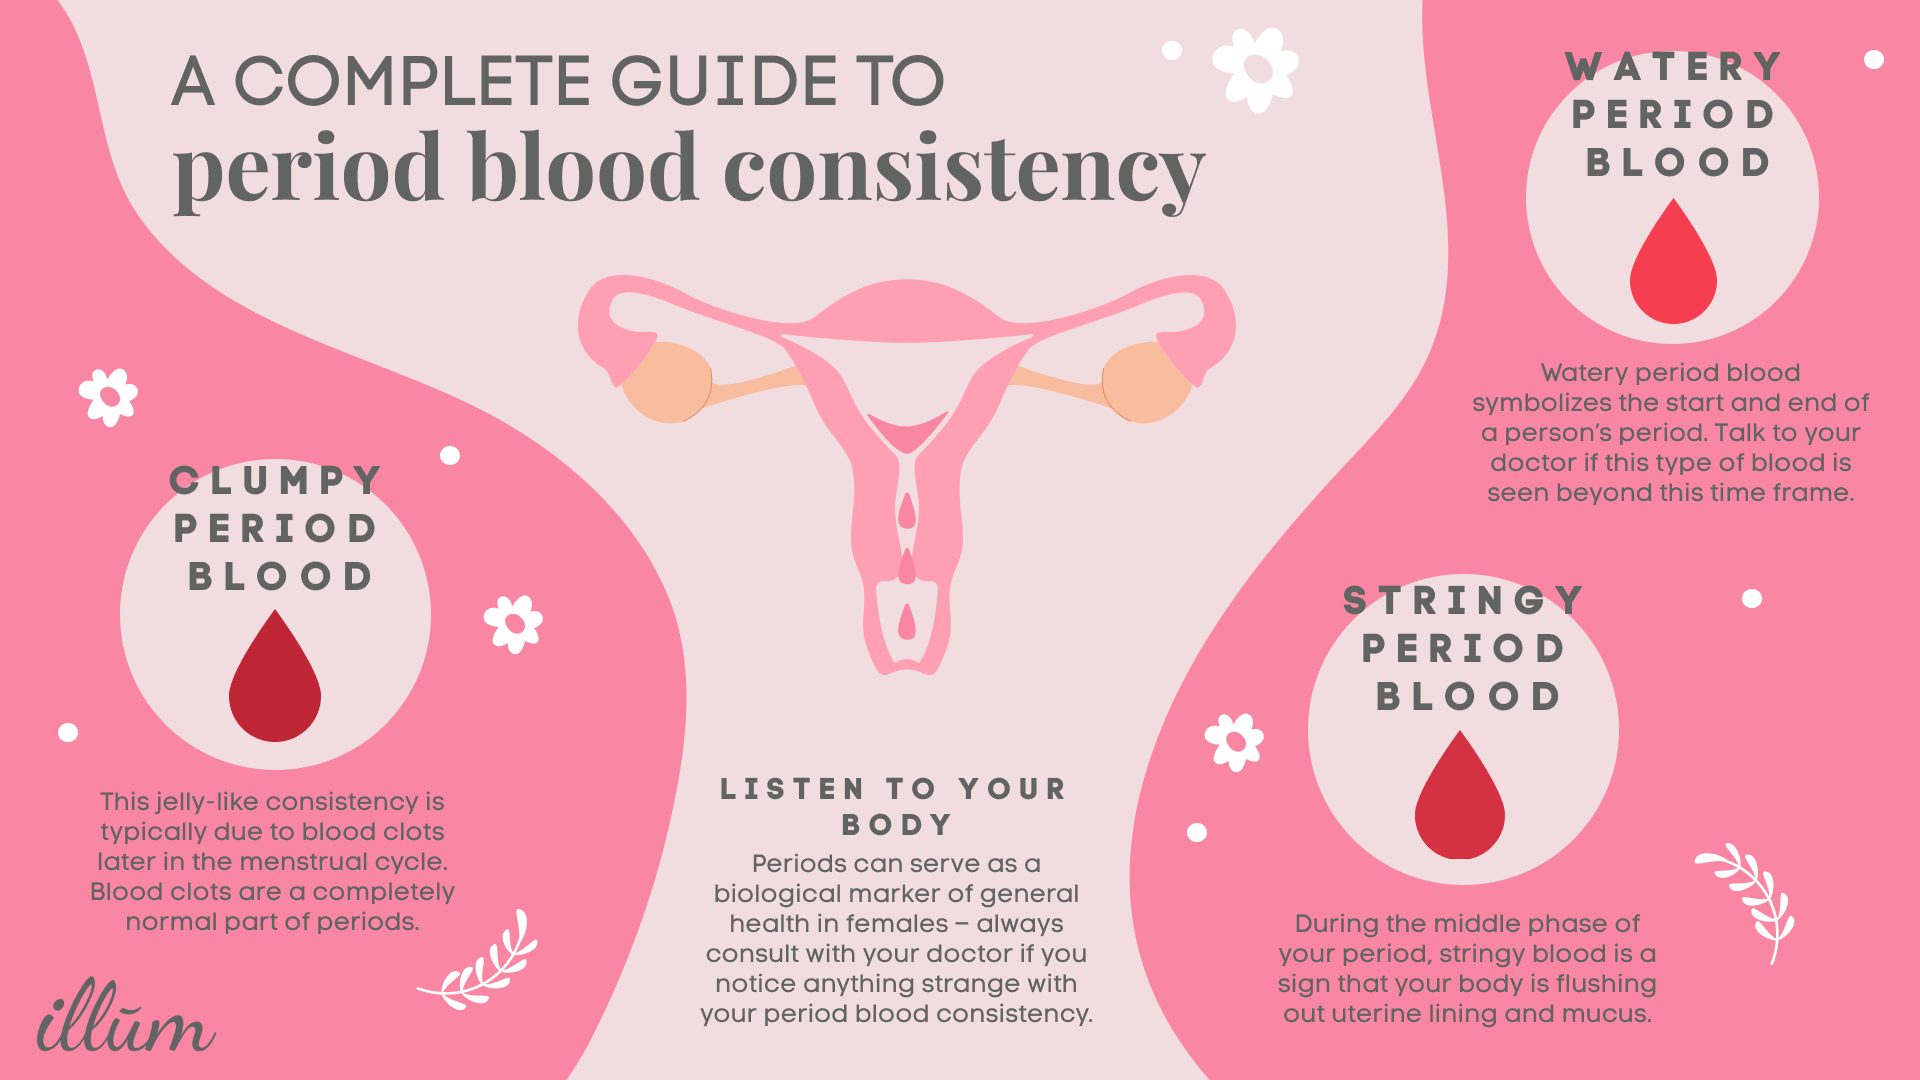 What Your Period Blood Consistency Is Telling You